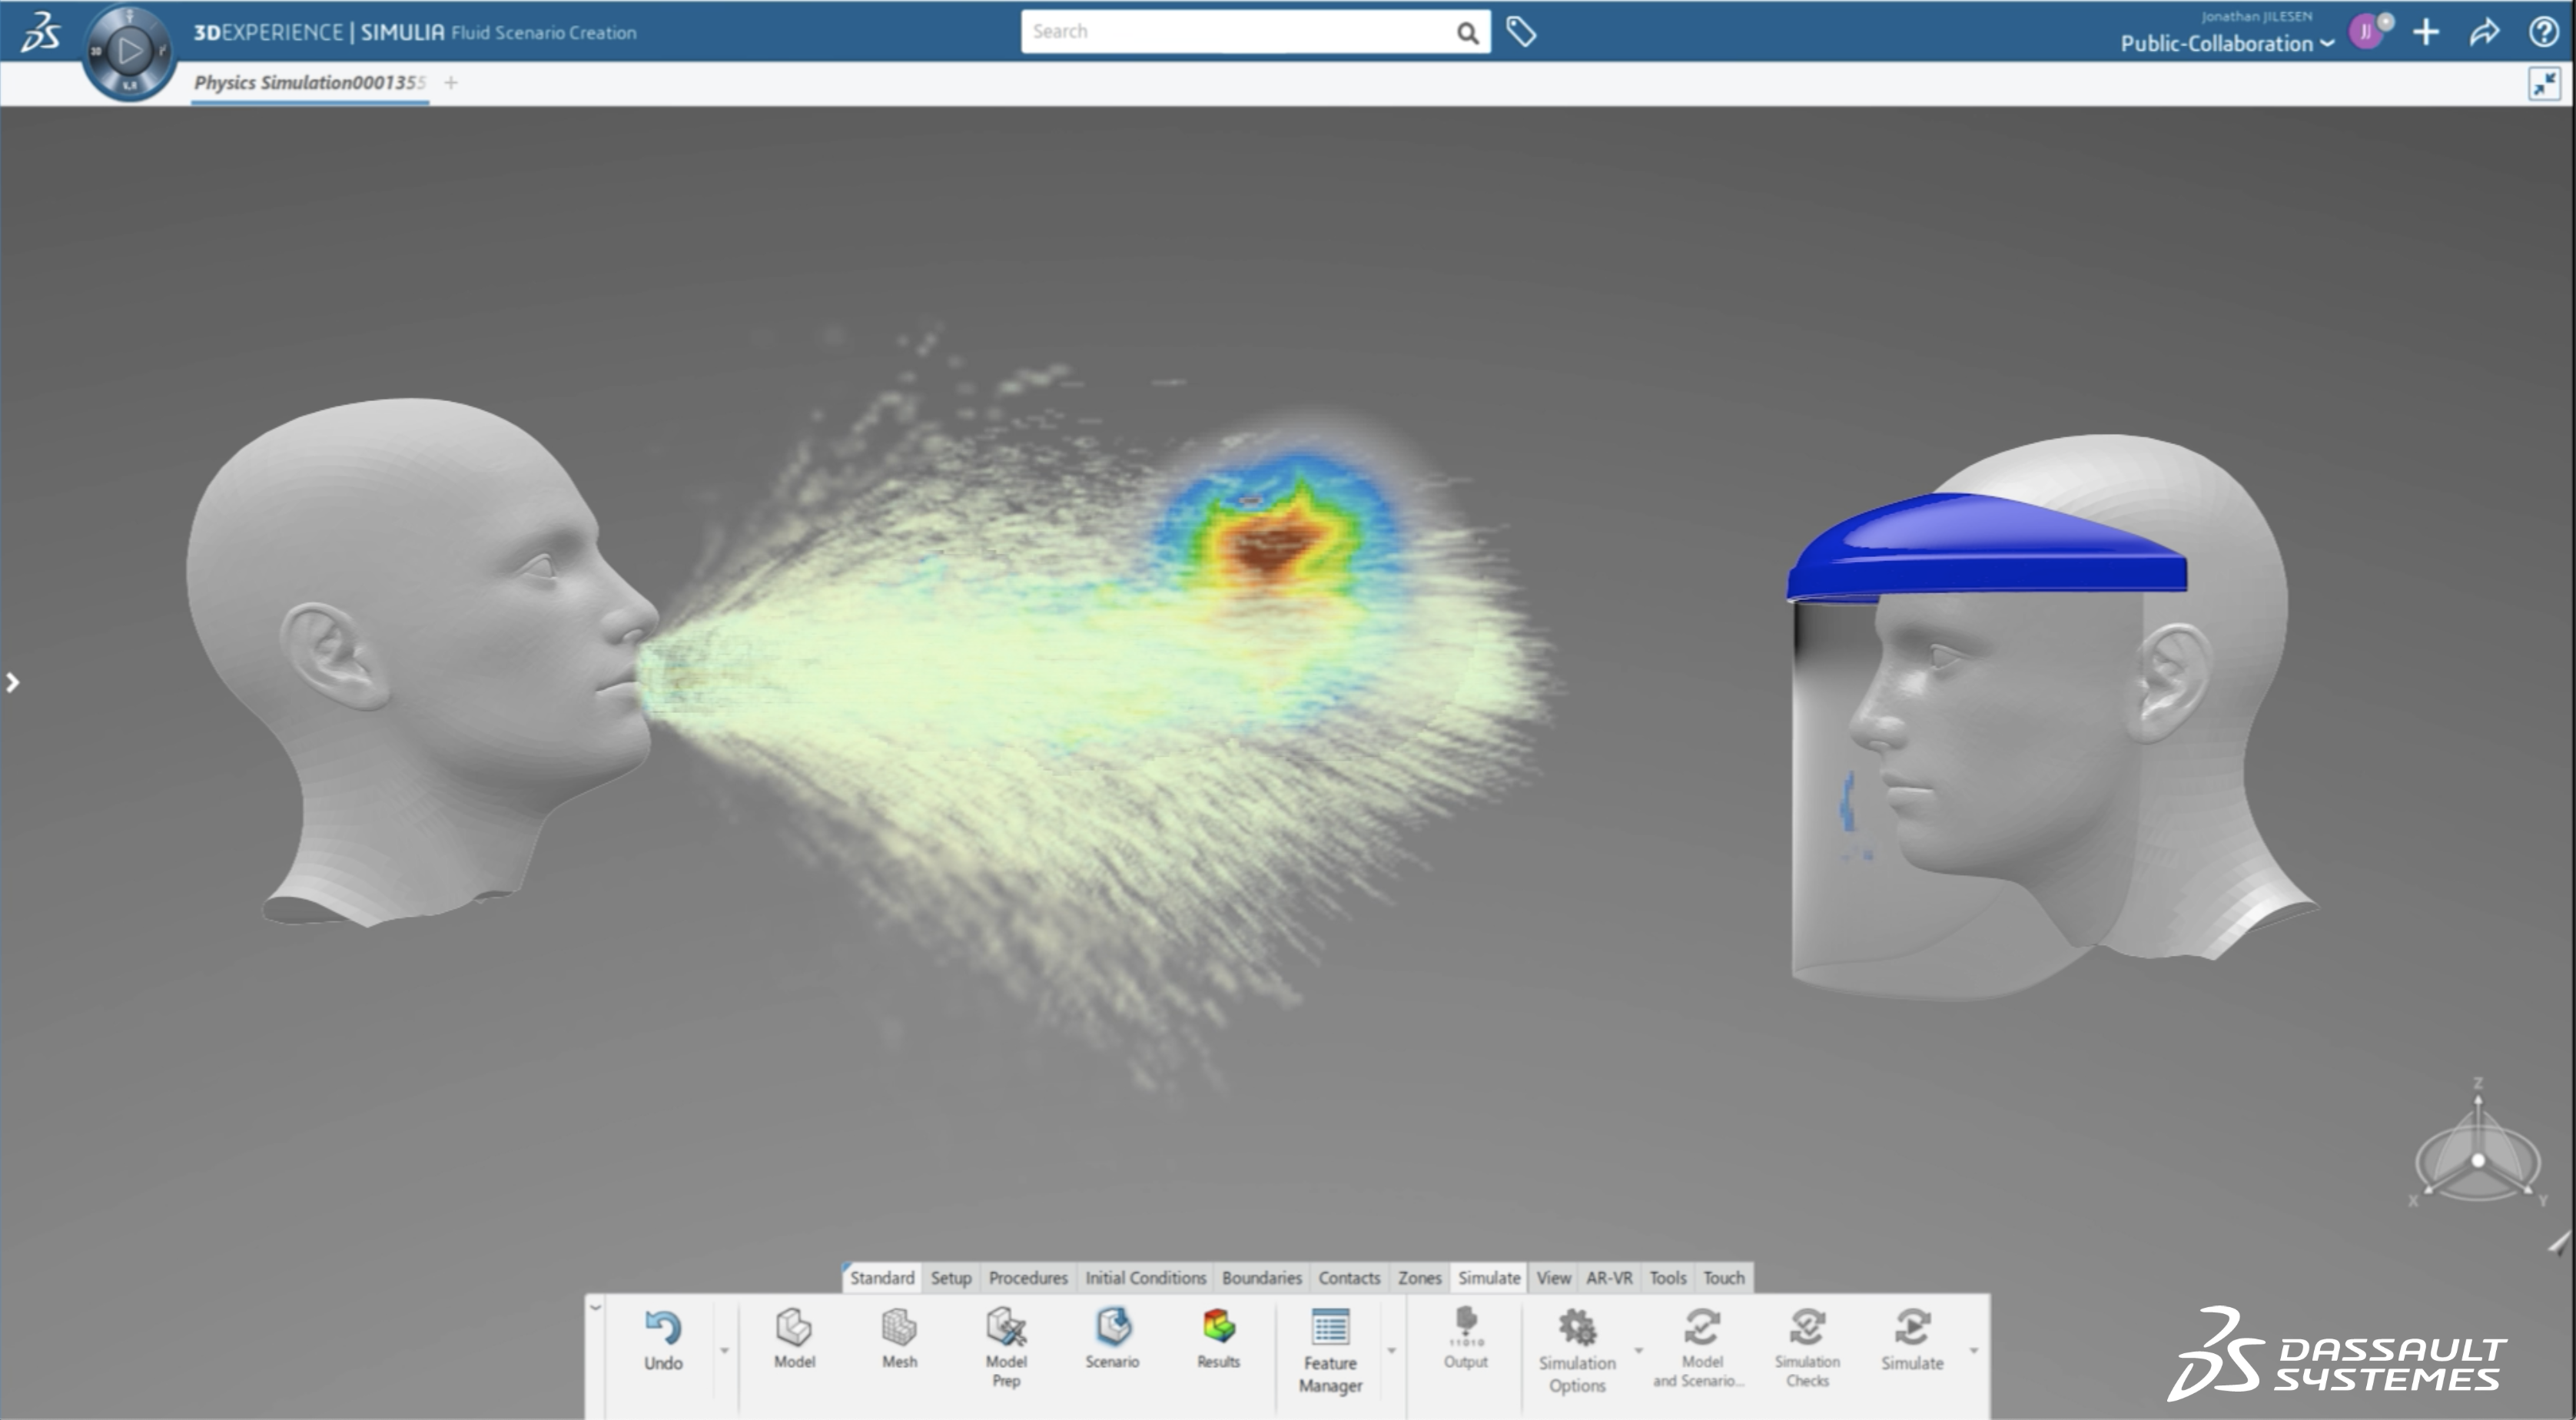 Dassault Systèmes OPENCOVID19 - SNEEZE SIMULATION 1